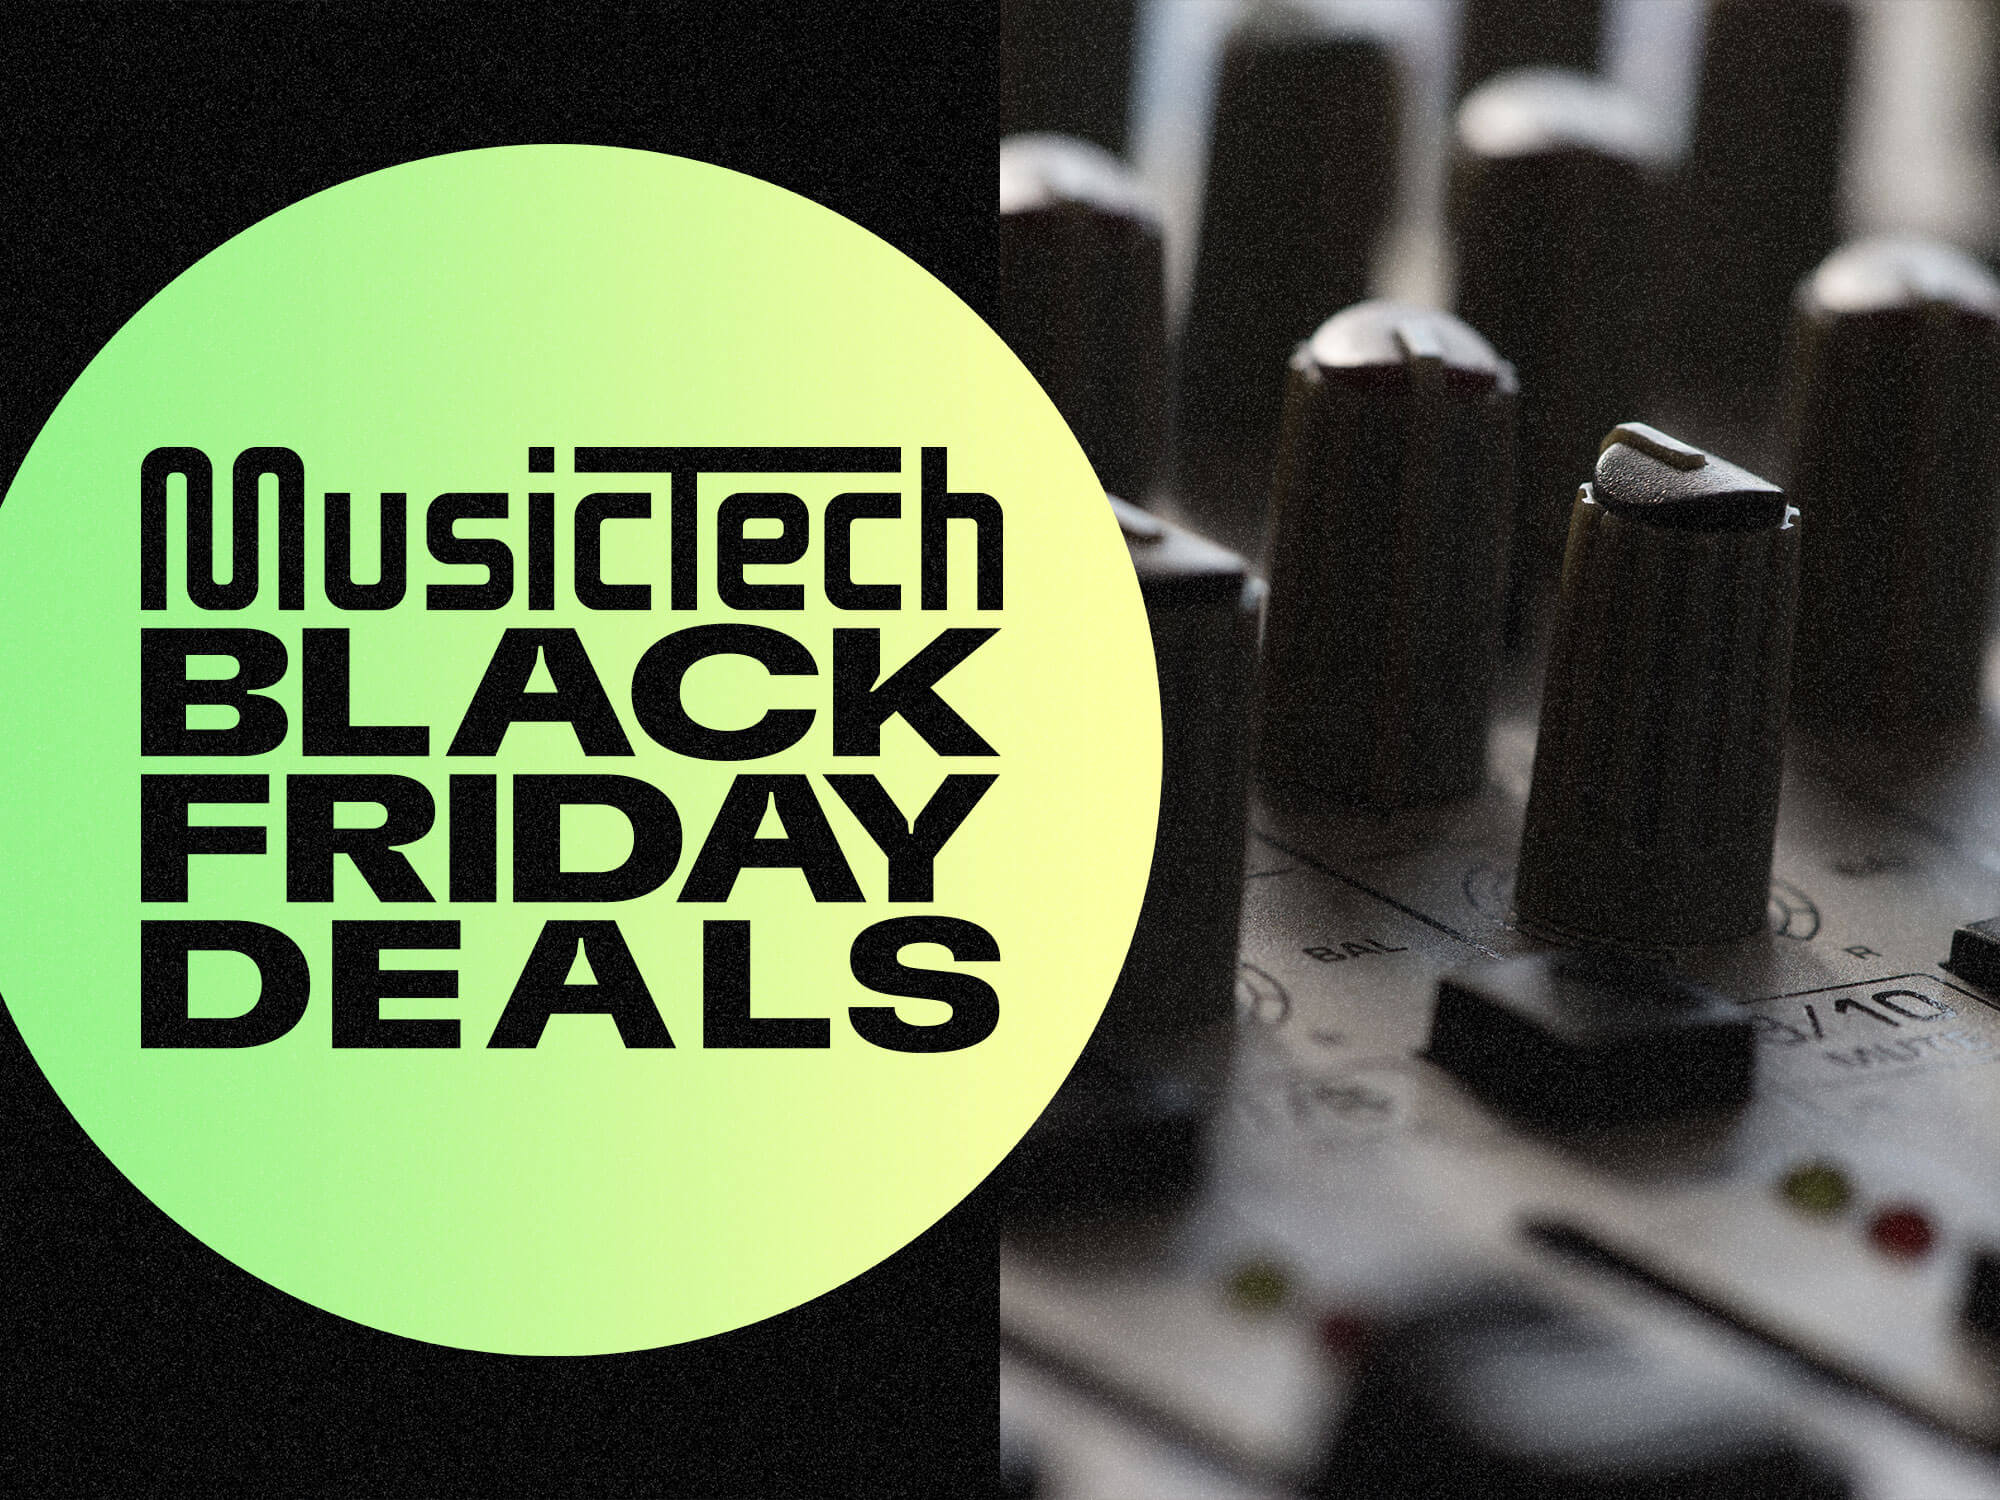 Black Friday deals and black knobs on mixing desk